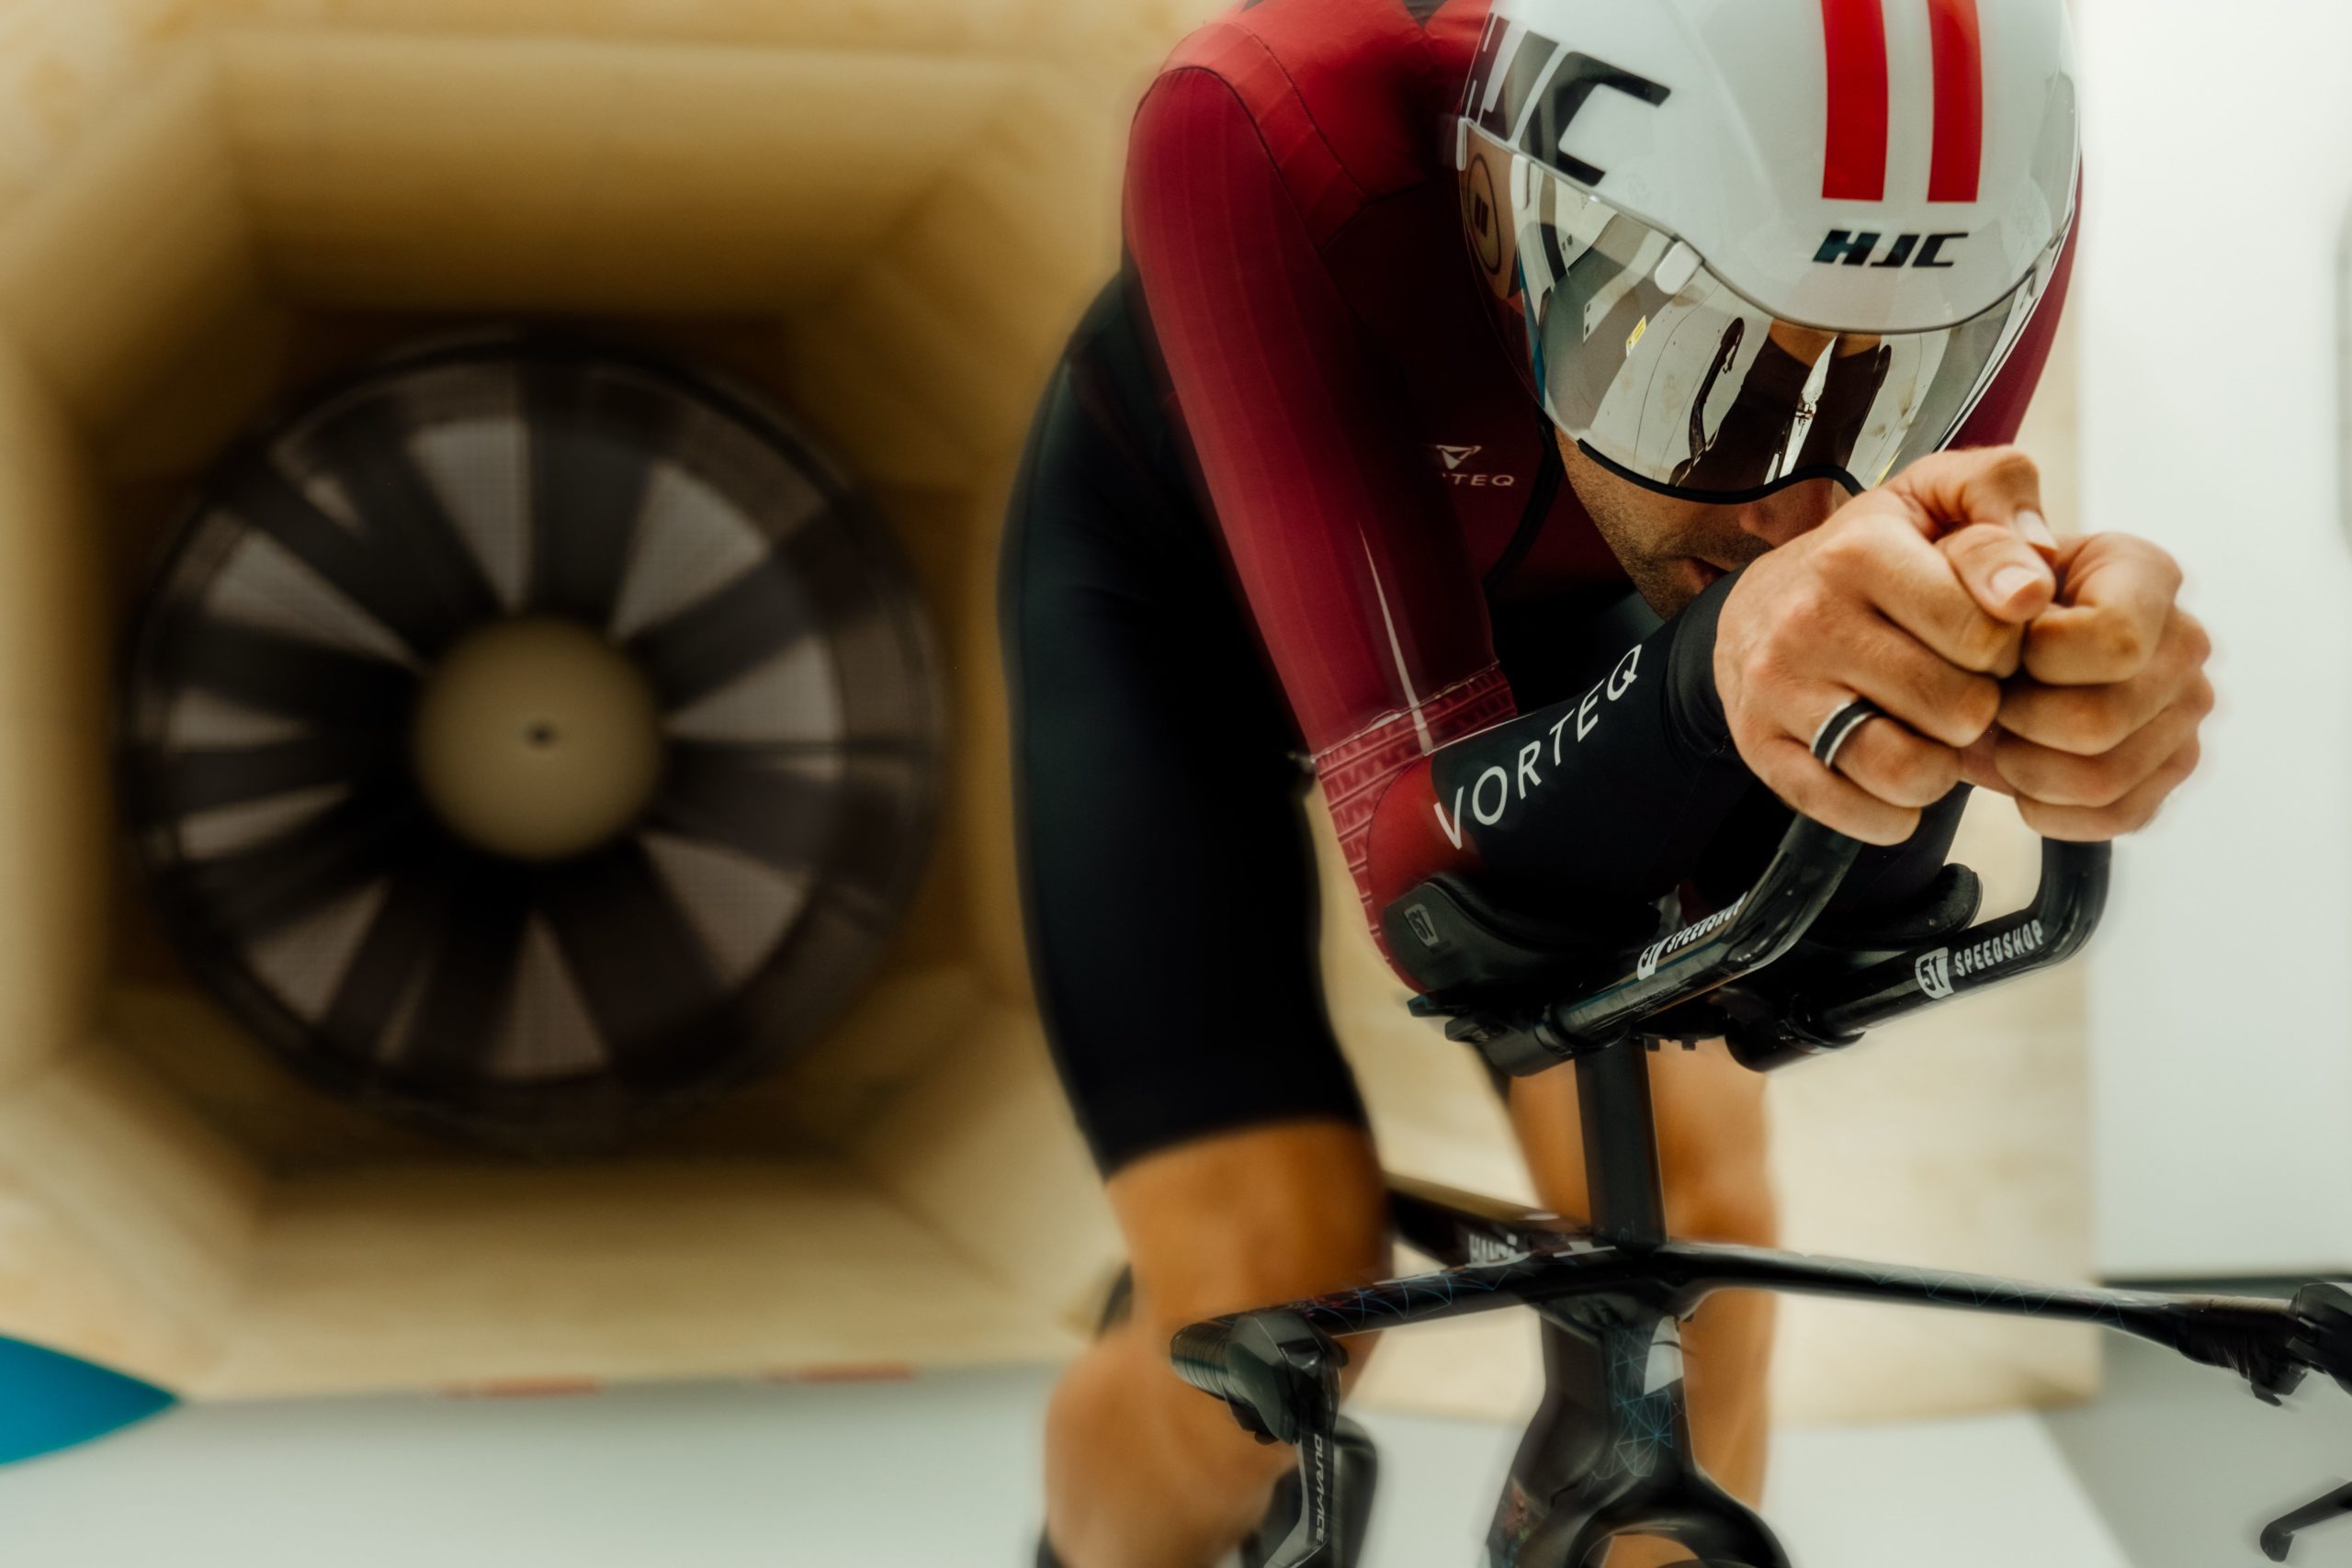 Physics of The Hour Record